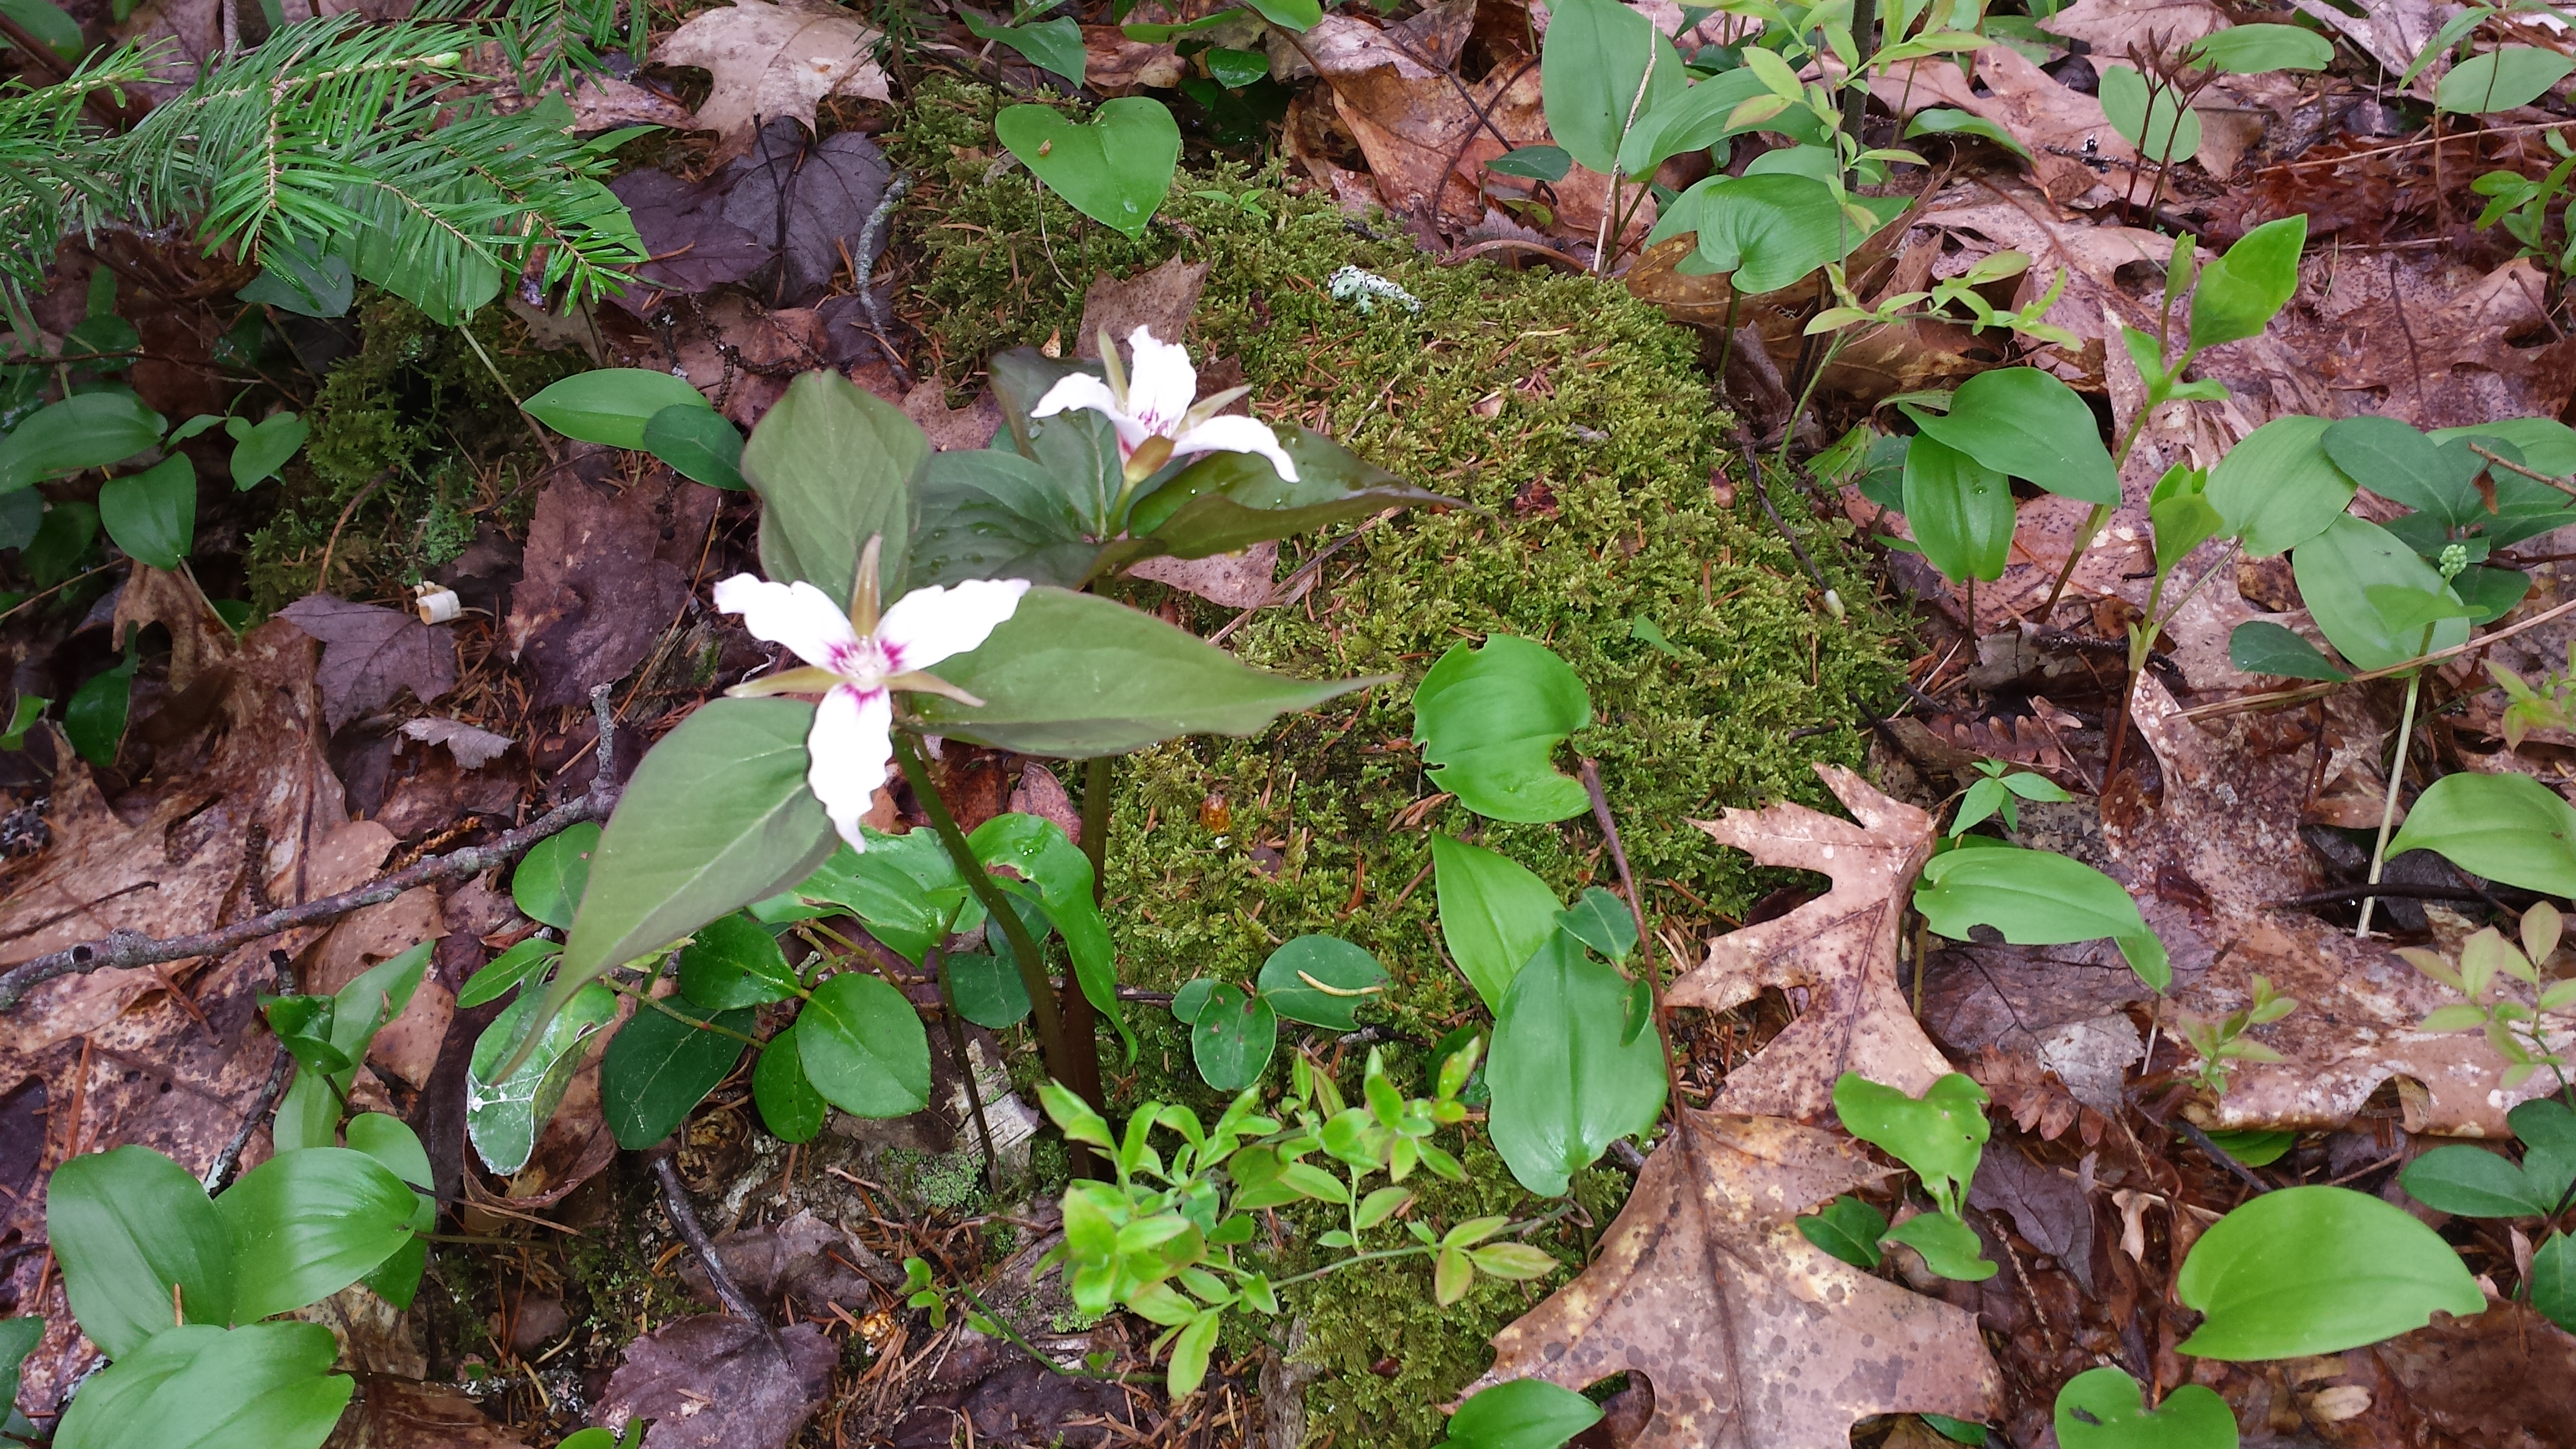 Trilliums bloom in early spring. The Caribou Bog Conservation Area (CBCA) is home to seasonal displays of plants and wildlife.